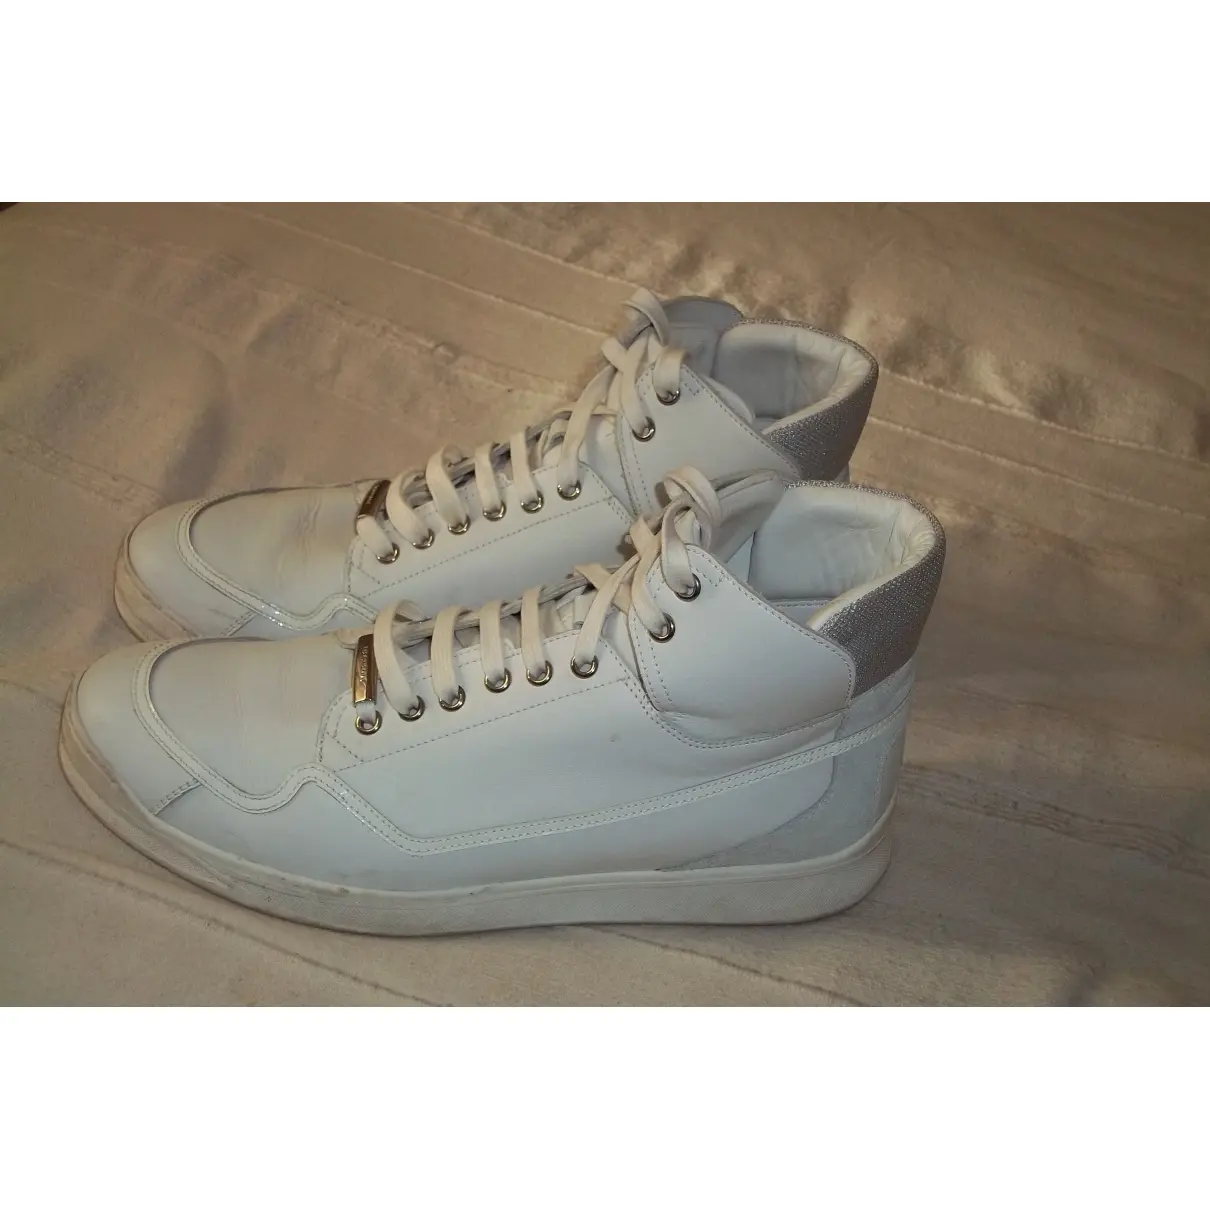 Dior Leather high trainers for sale